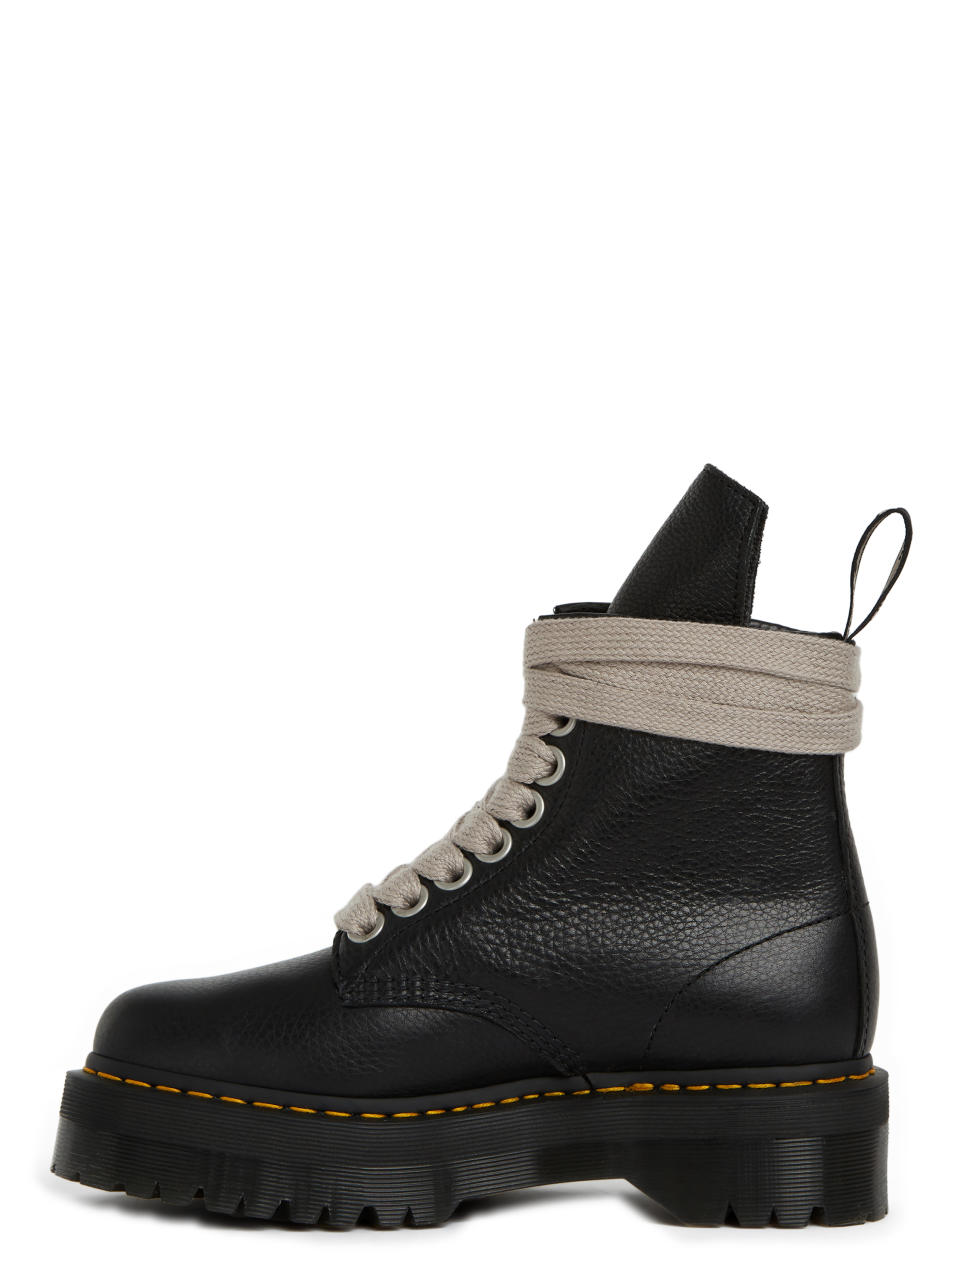 The 1460 boot from the Dr. Martens x Rick Owens collaboration.